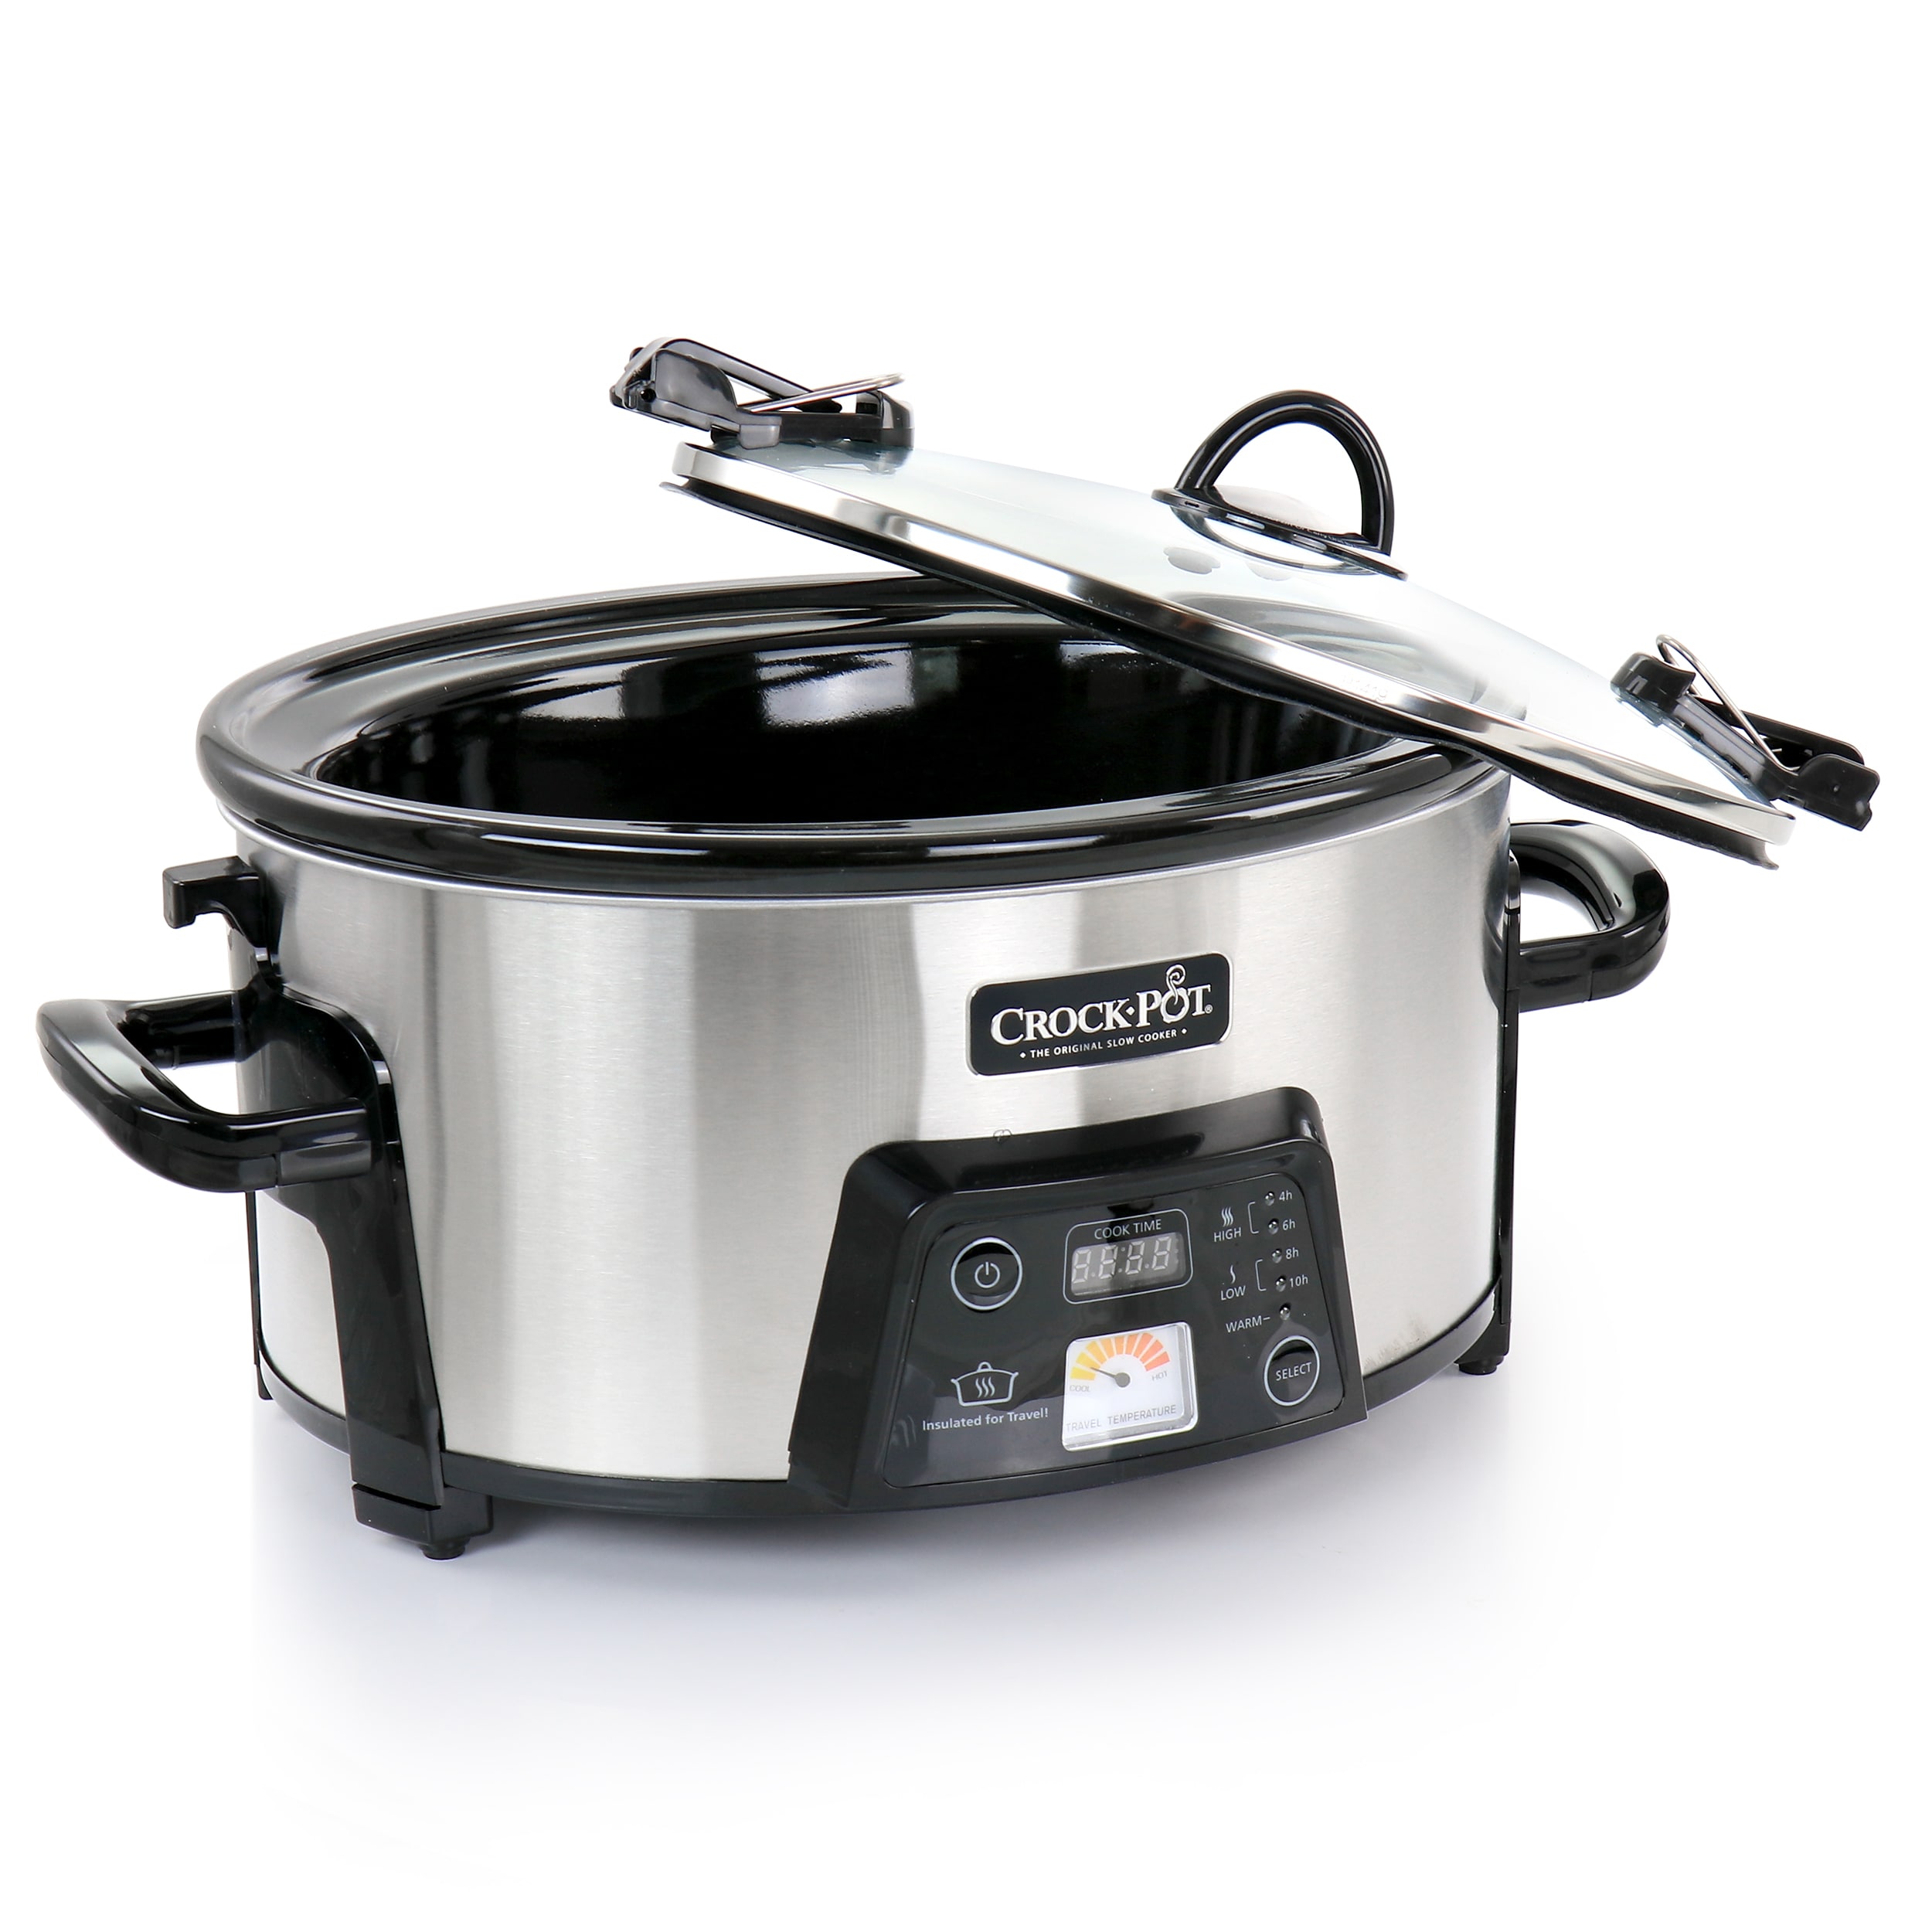 6 Quart Oval Slow Cooker, Red - 33666